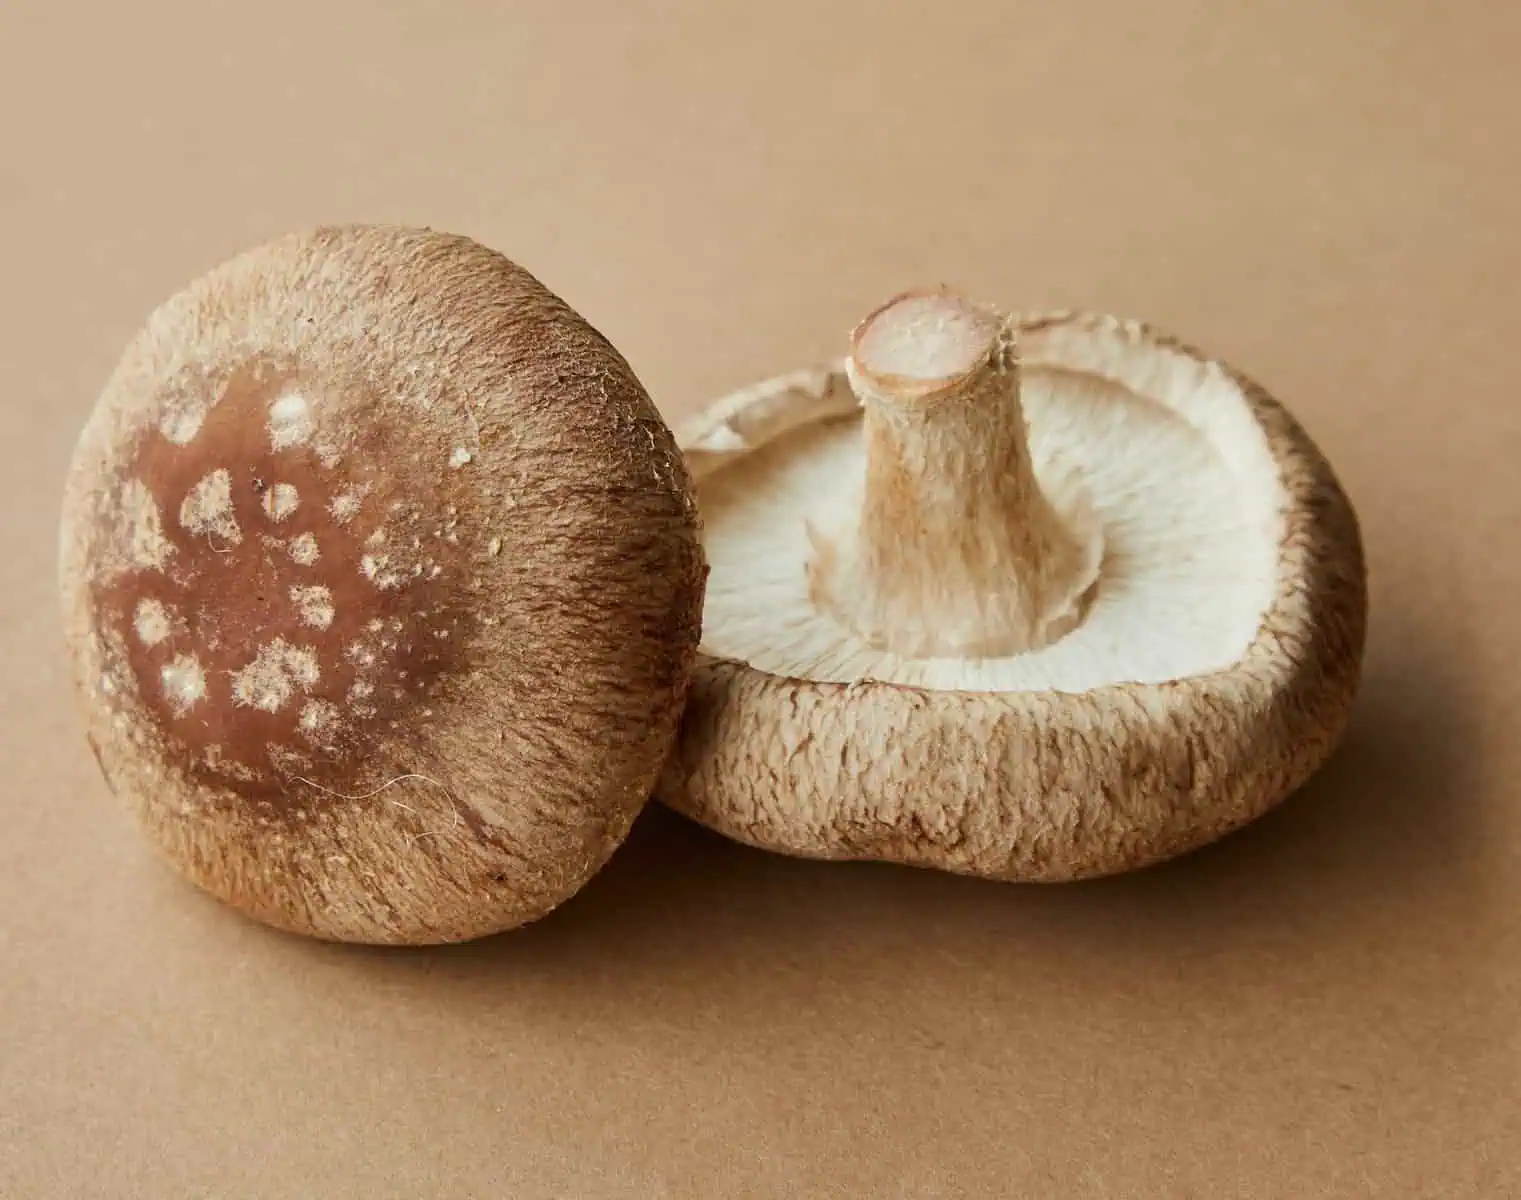 High angle of delicious raw mushrooms with spotted caps placed on light brown background